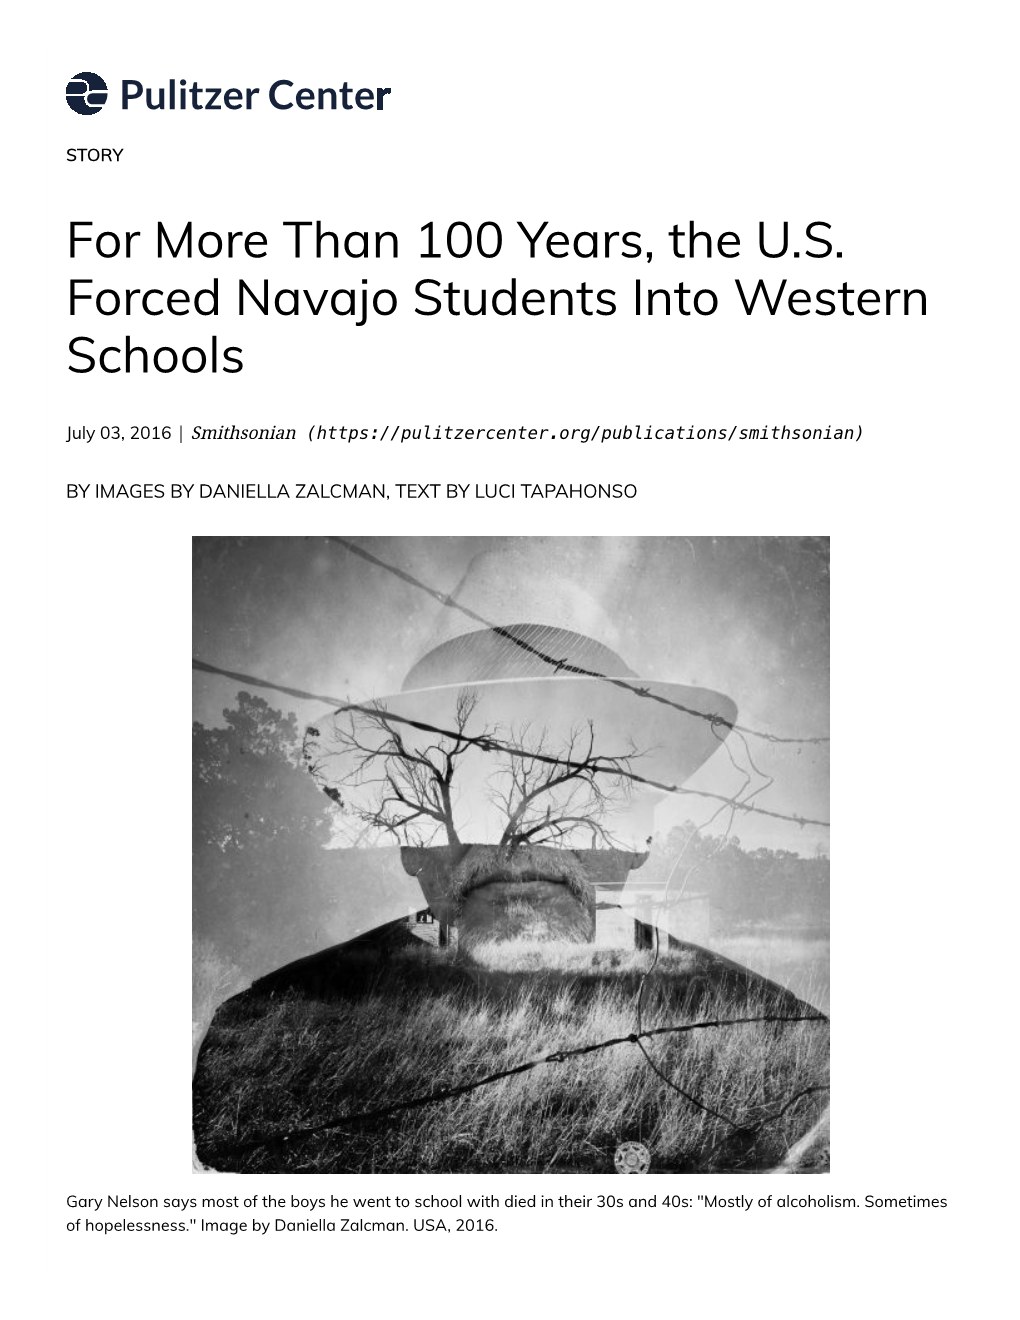 For More Than 100 Years, the U.S. Forced Navajo Students Into Western Schools